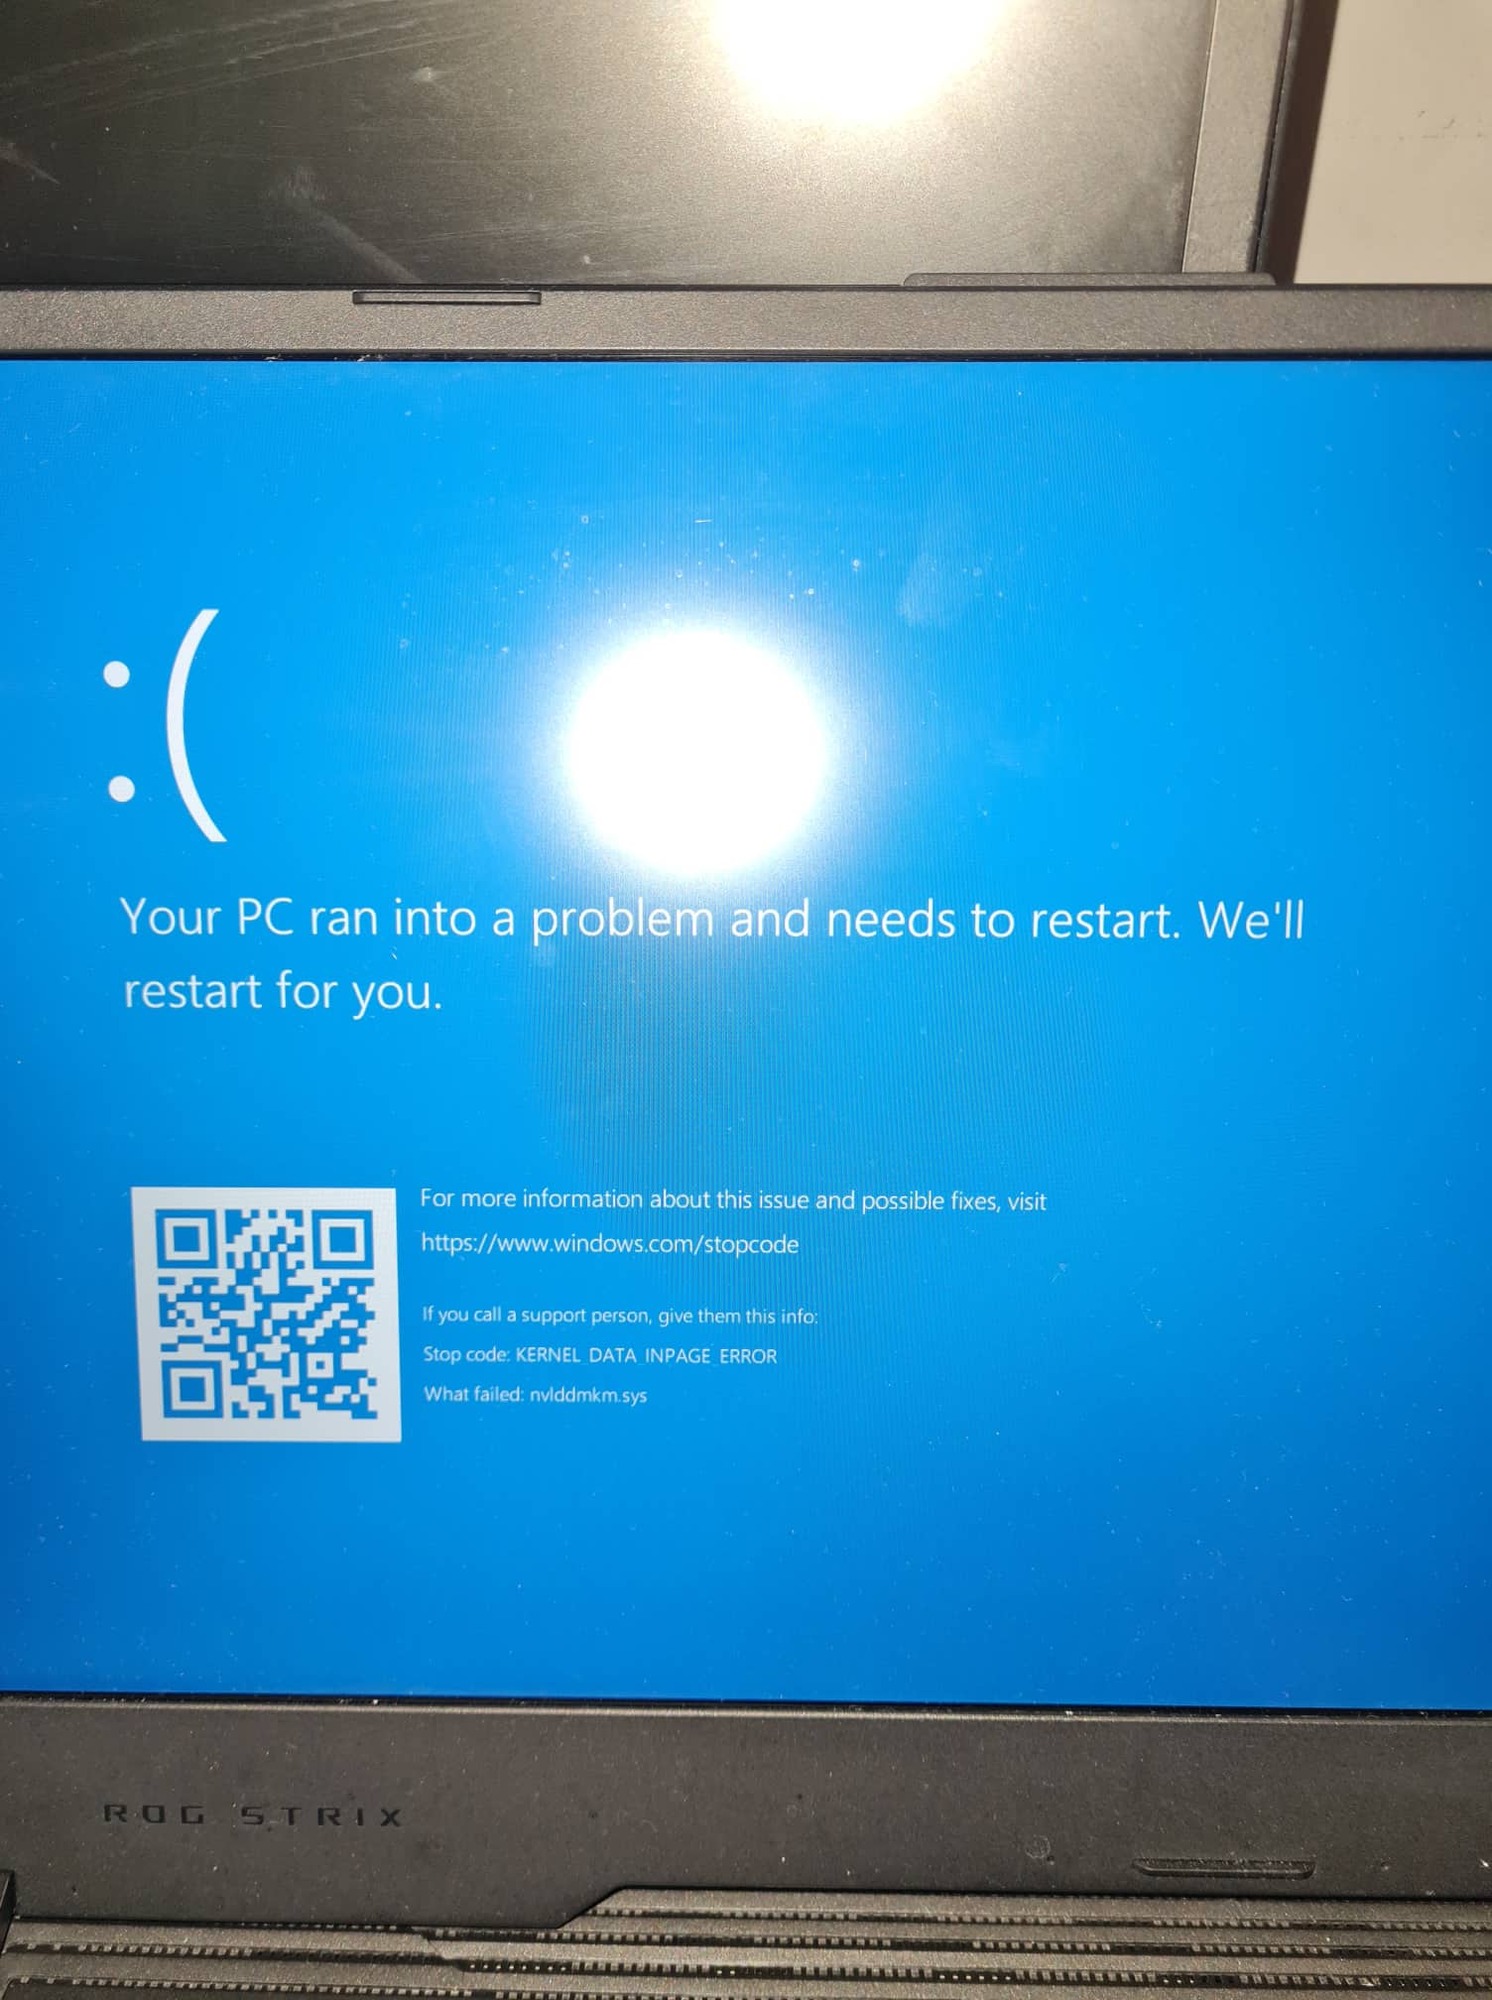 UNEXPECTED_STORE_EXCEPTION AND KERNEL_DATA_INPAGE_ERROR Blue Screens 06be53e5-0308-465d-b73f-3ae5b9fa2463?upload=true.jpg